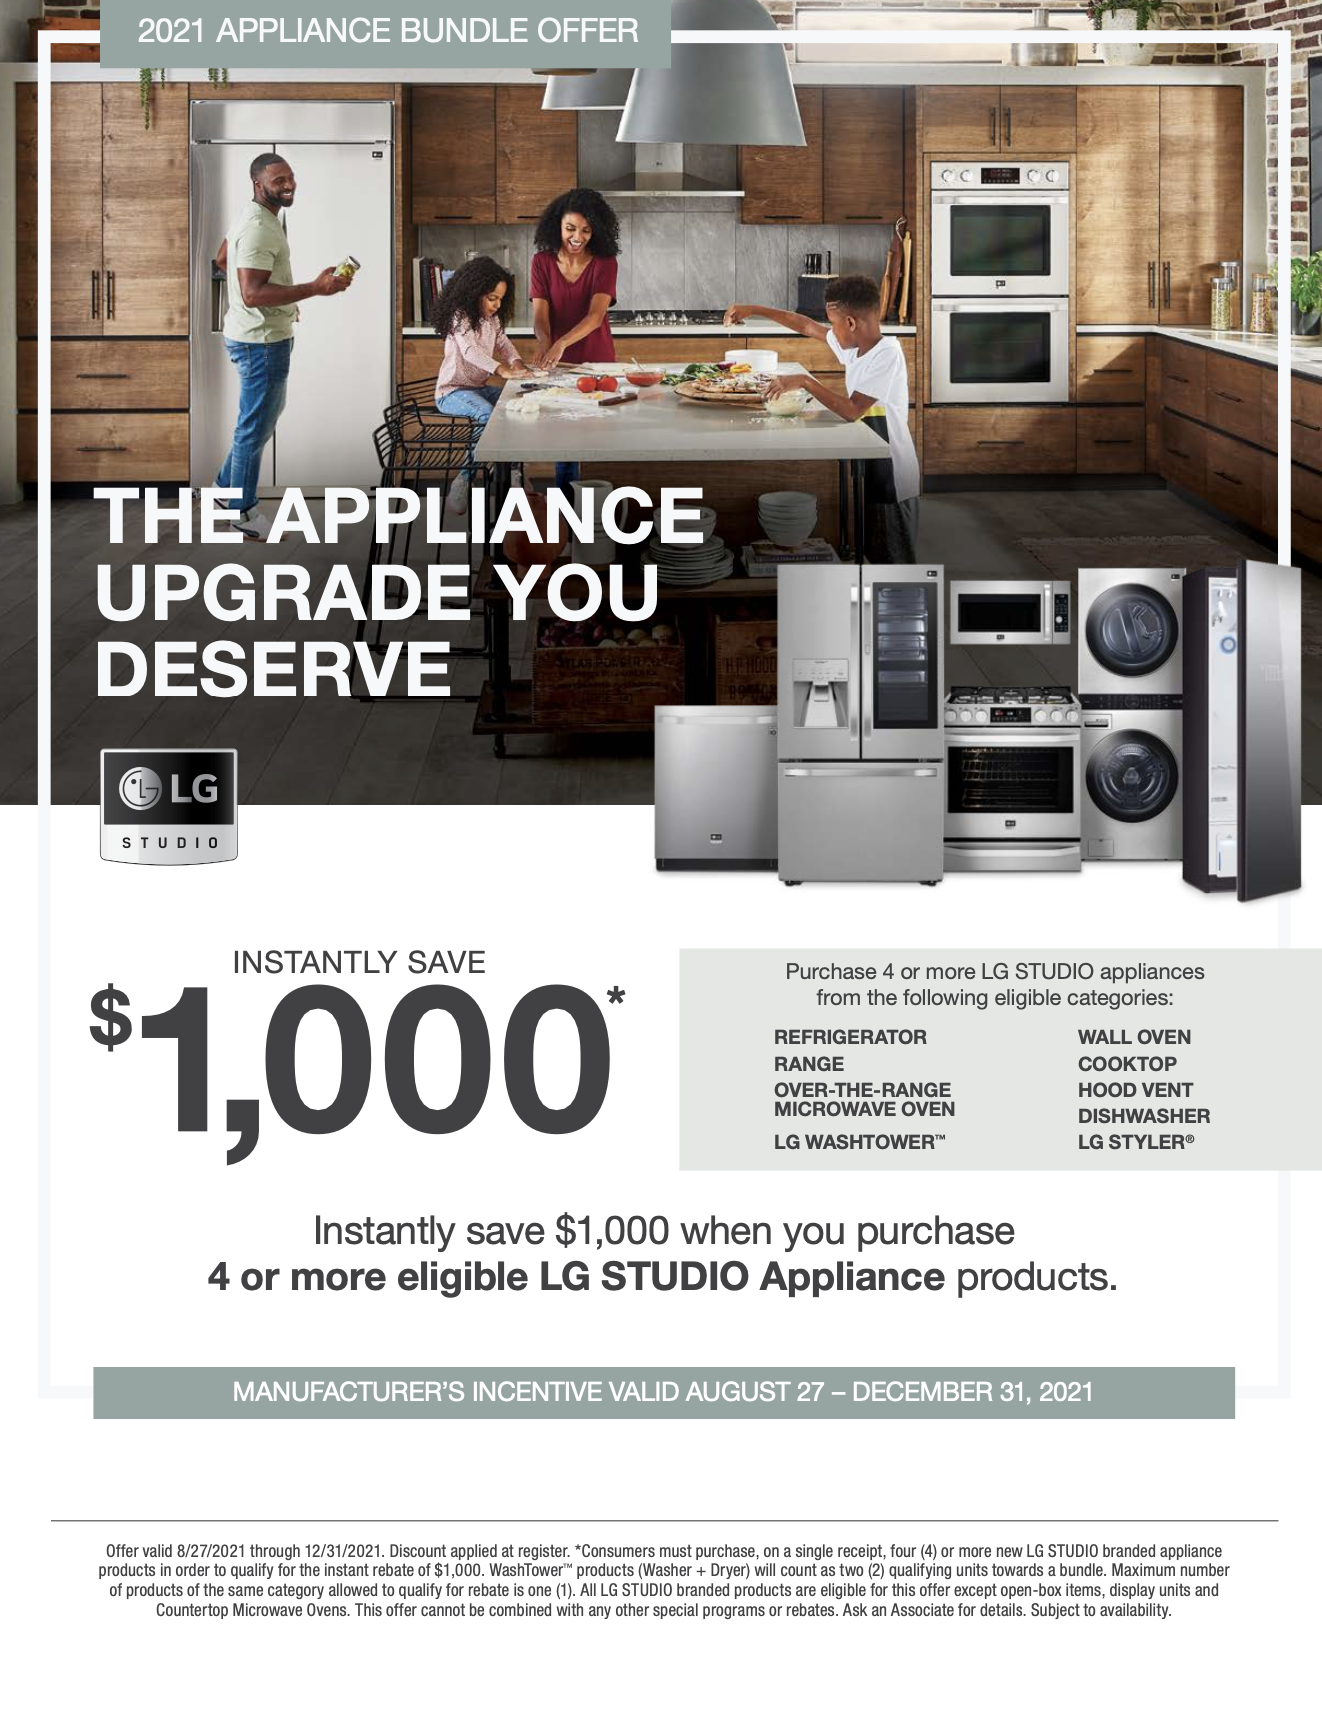 Home Depot Rebate for Home Appliances